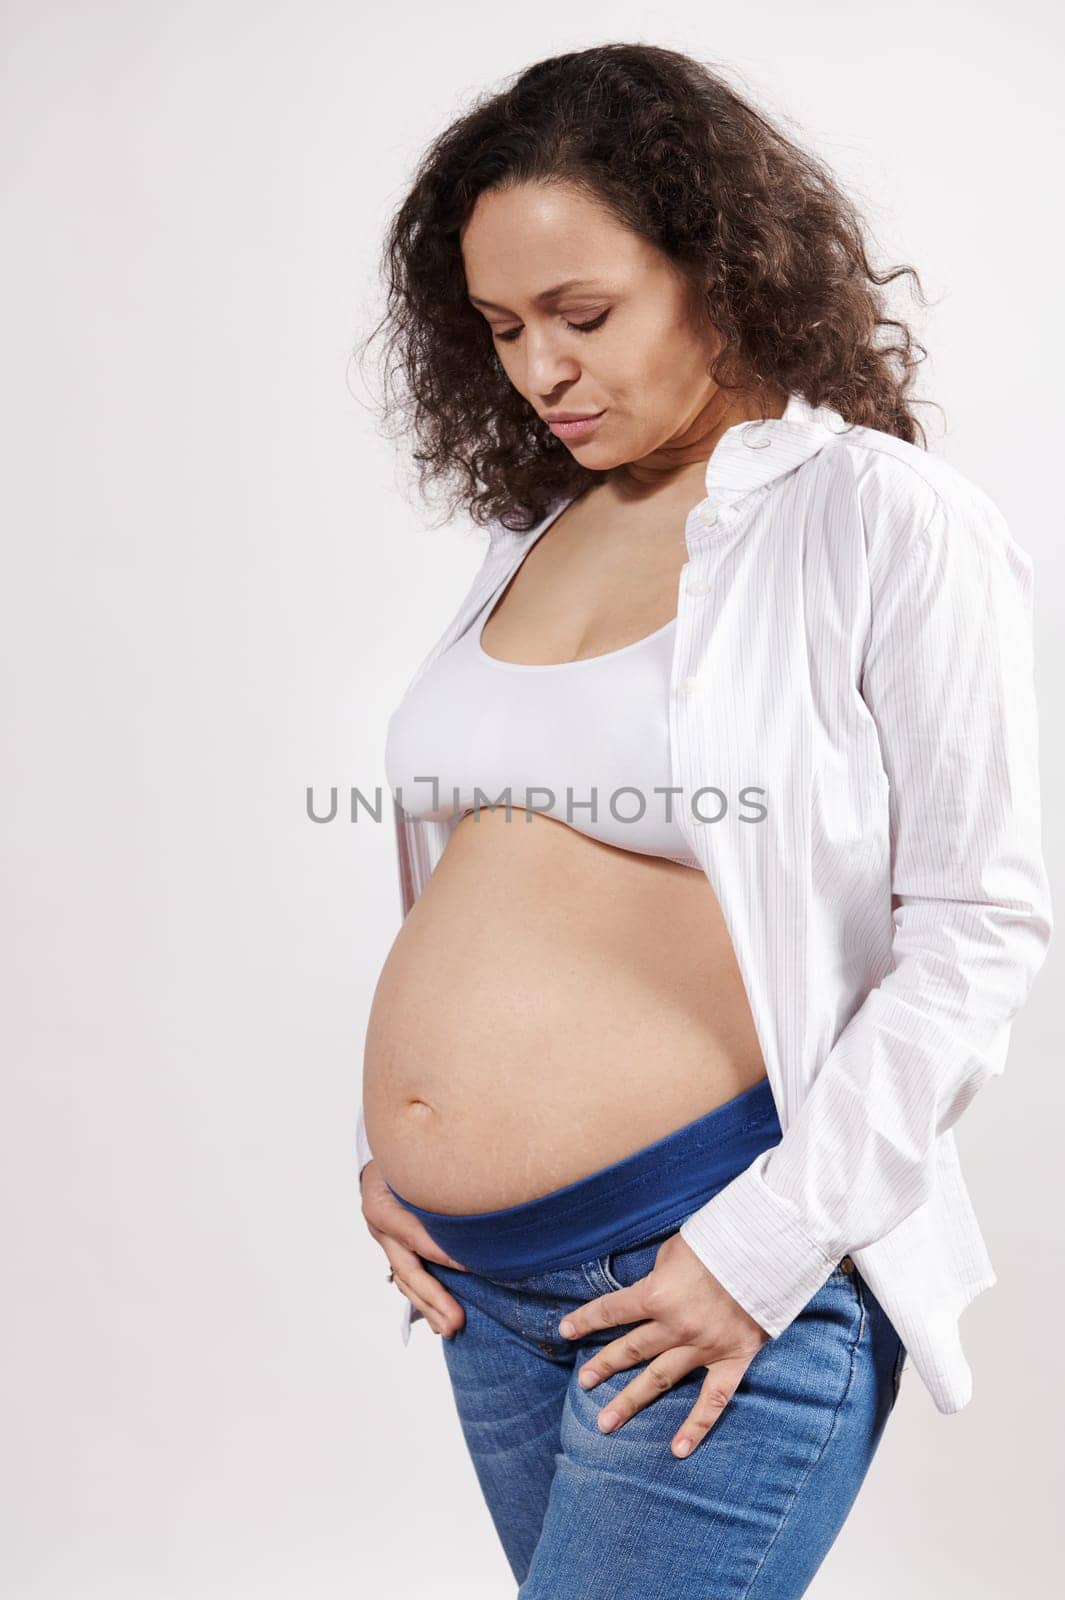 Attractive ethnic pregnant woman posing bare belly, isolated over white background. Pregnancy fashion. Body positivity by artgf